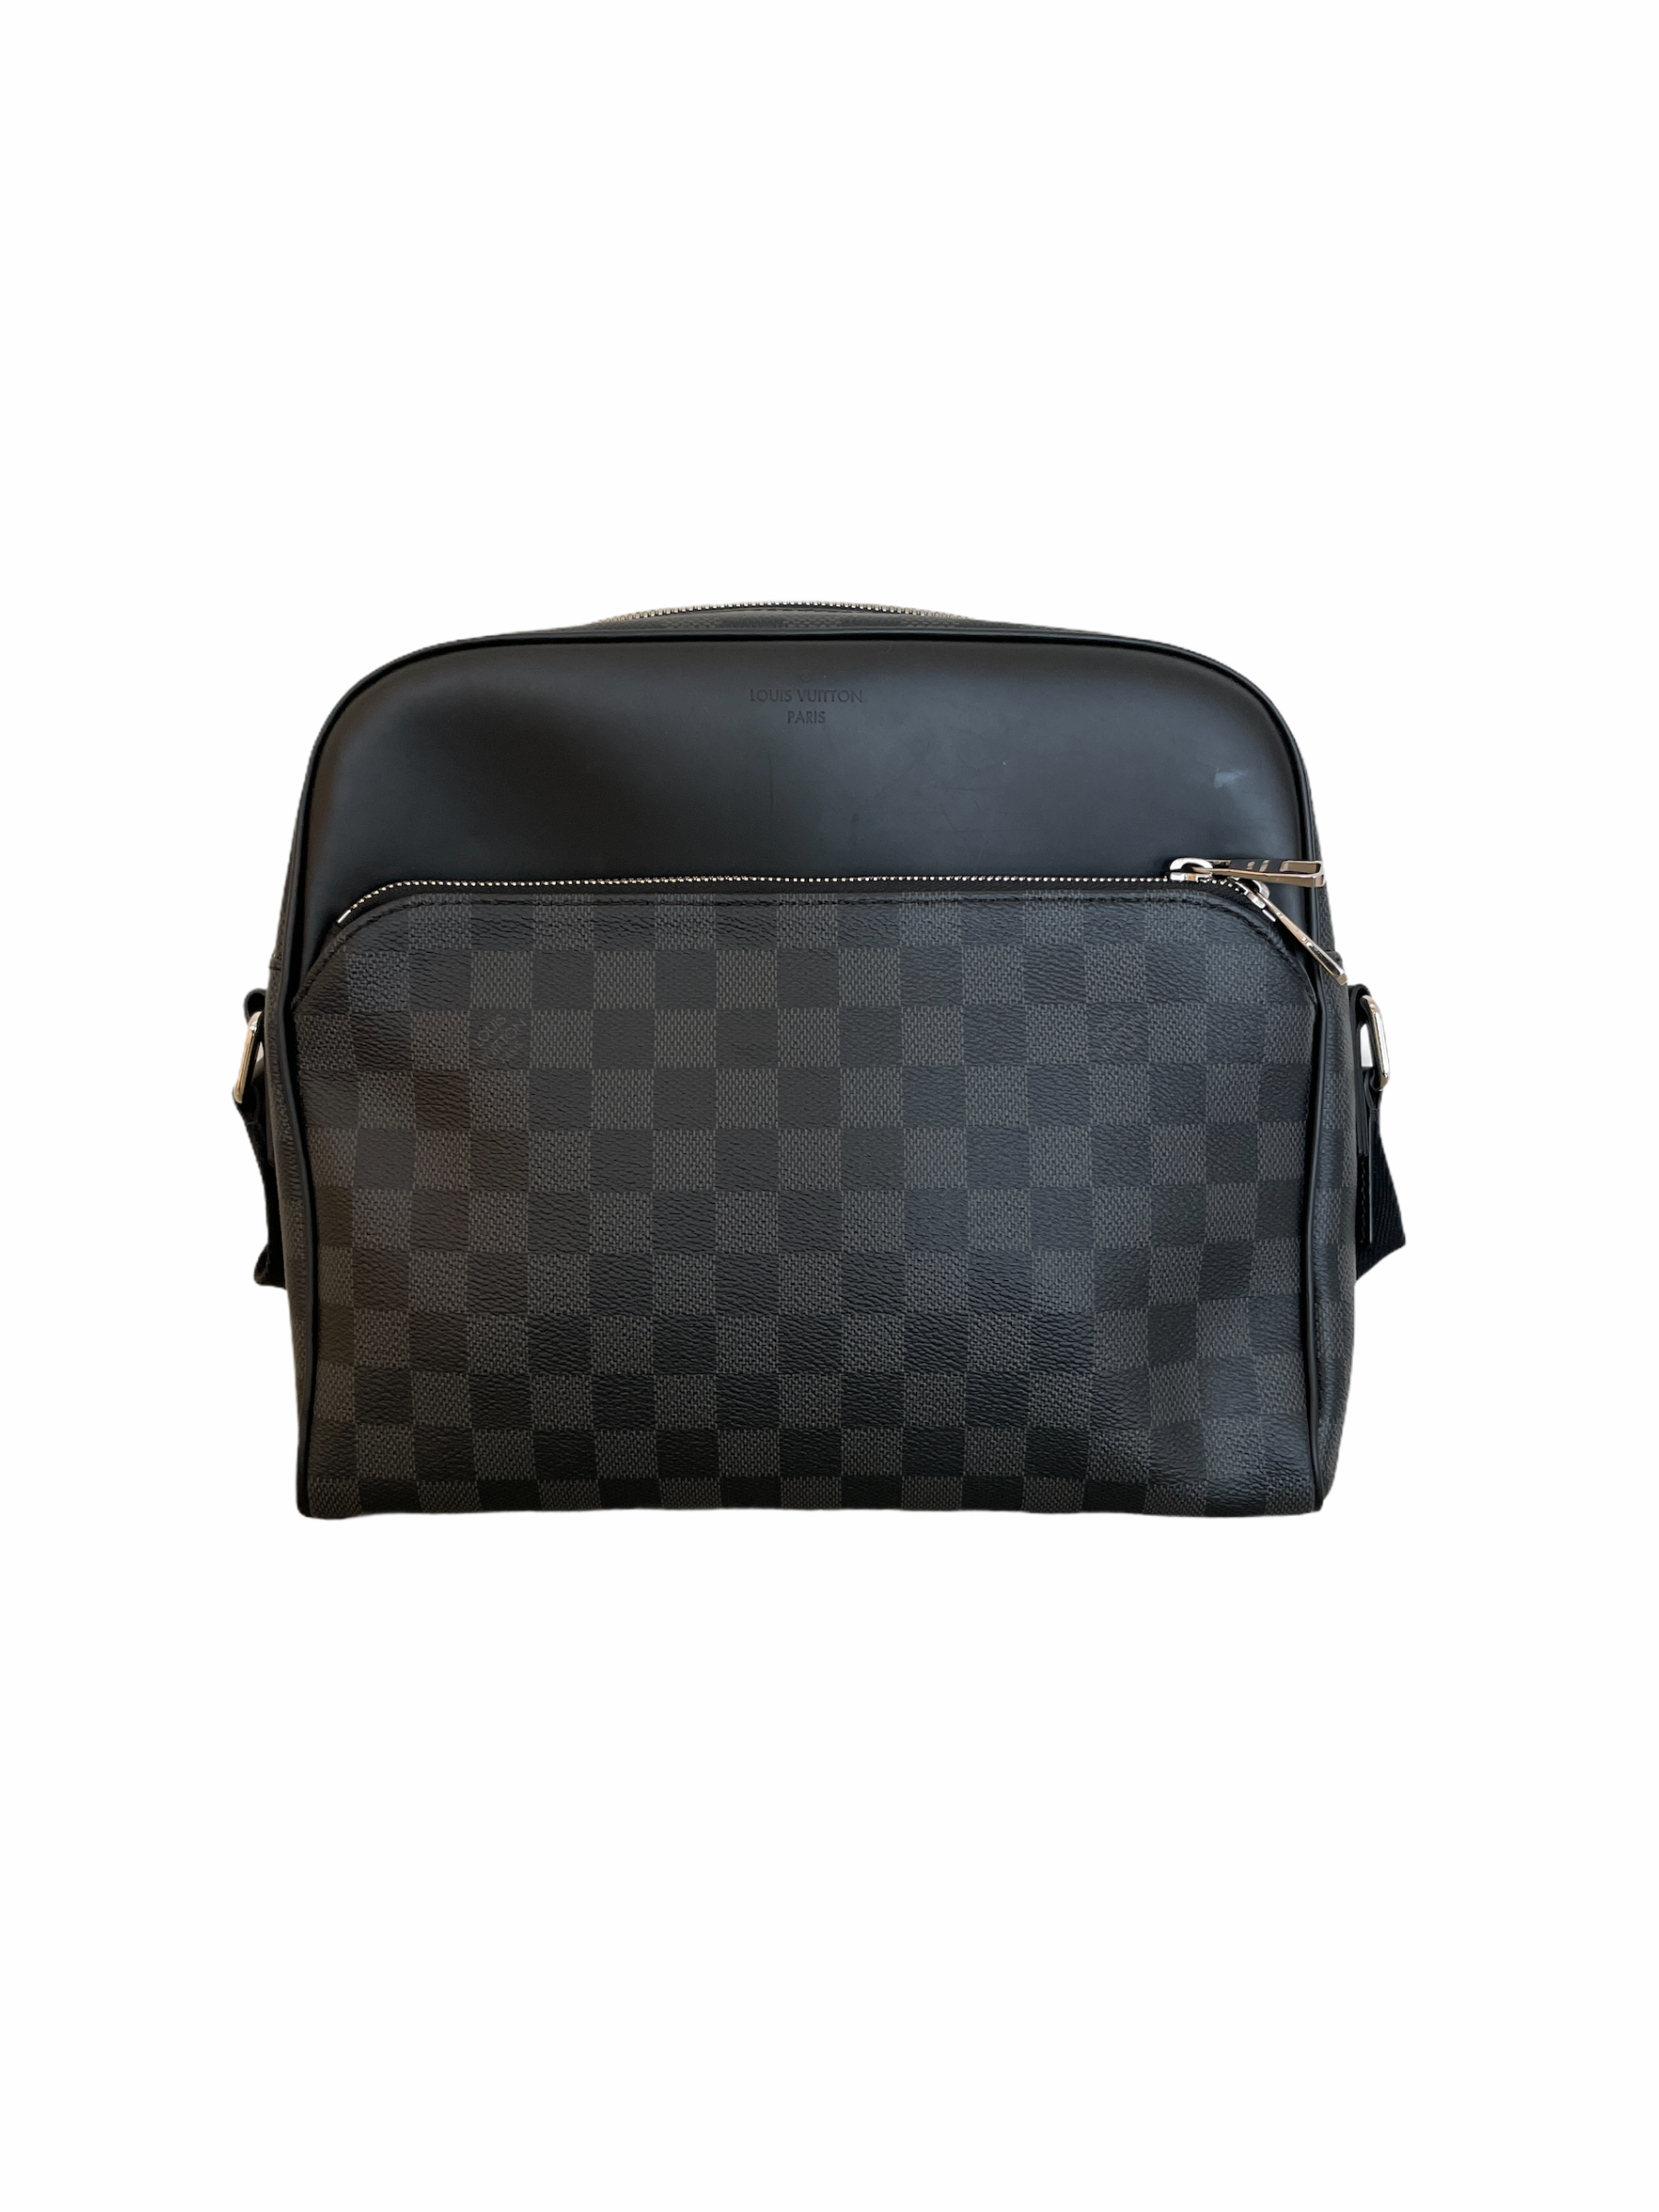 Leather Tote Bags for Men Collection  LOUIS VUITTON